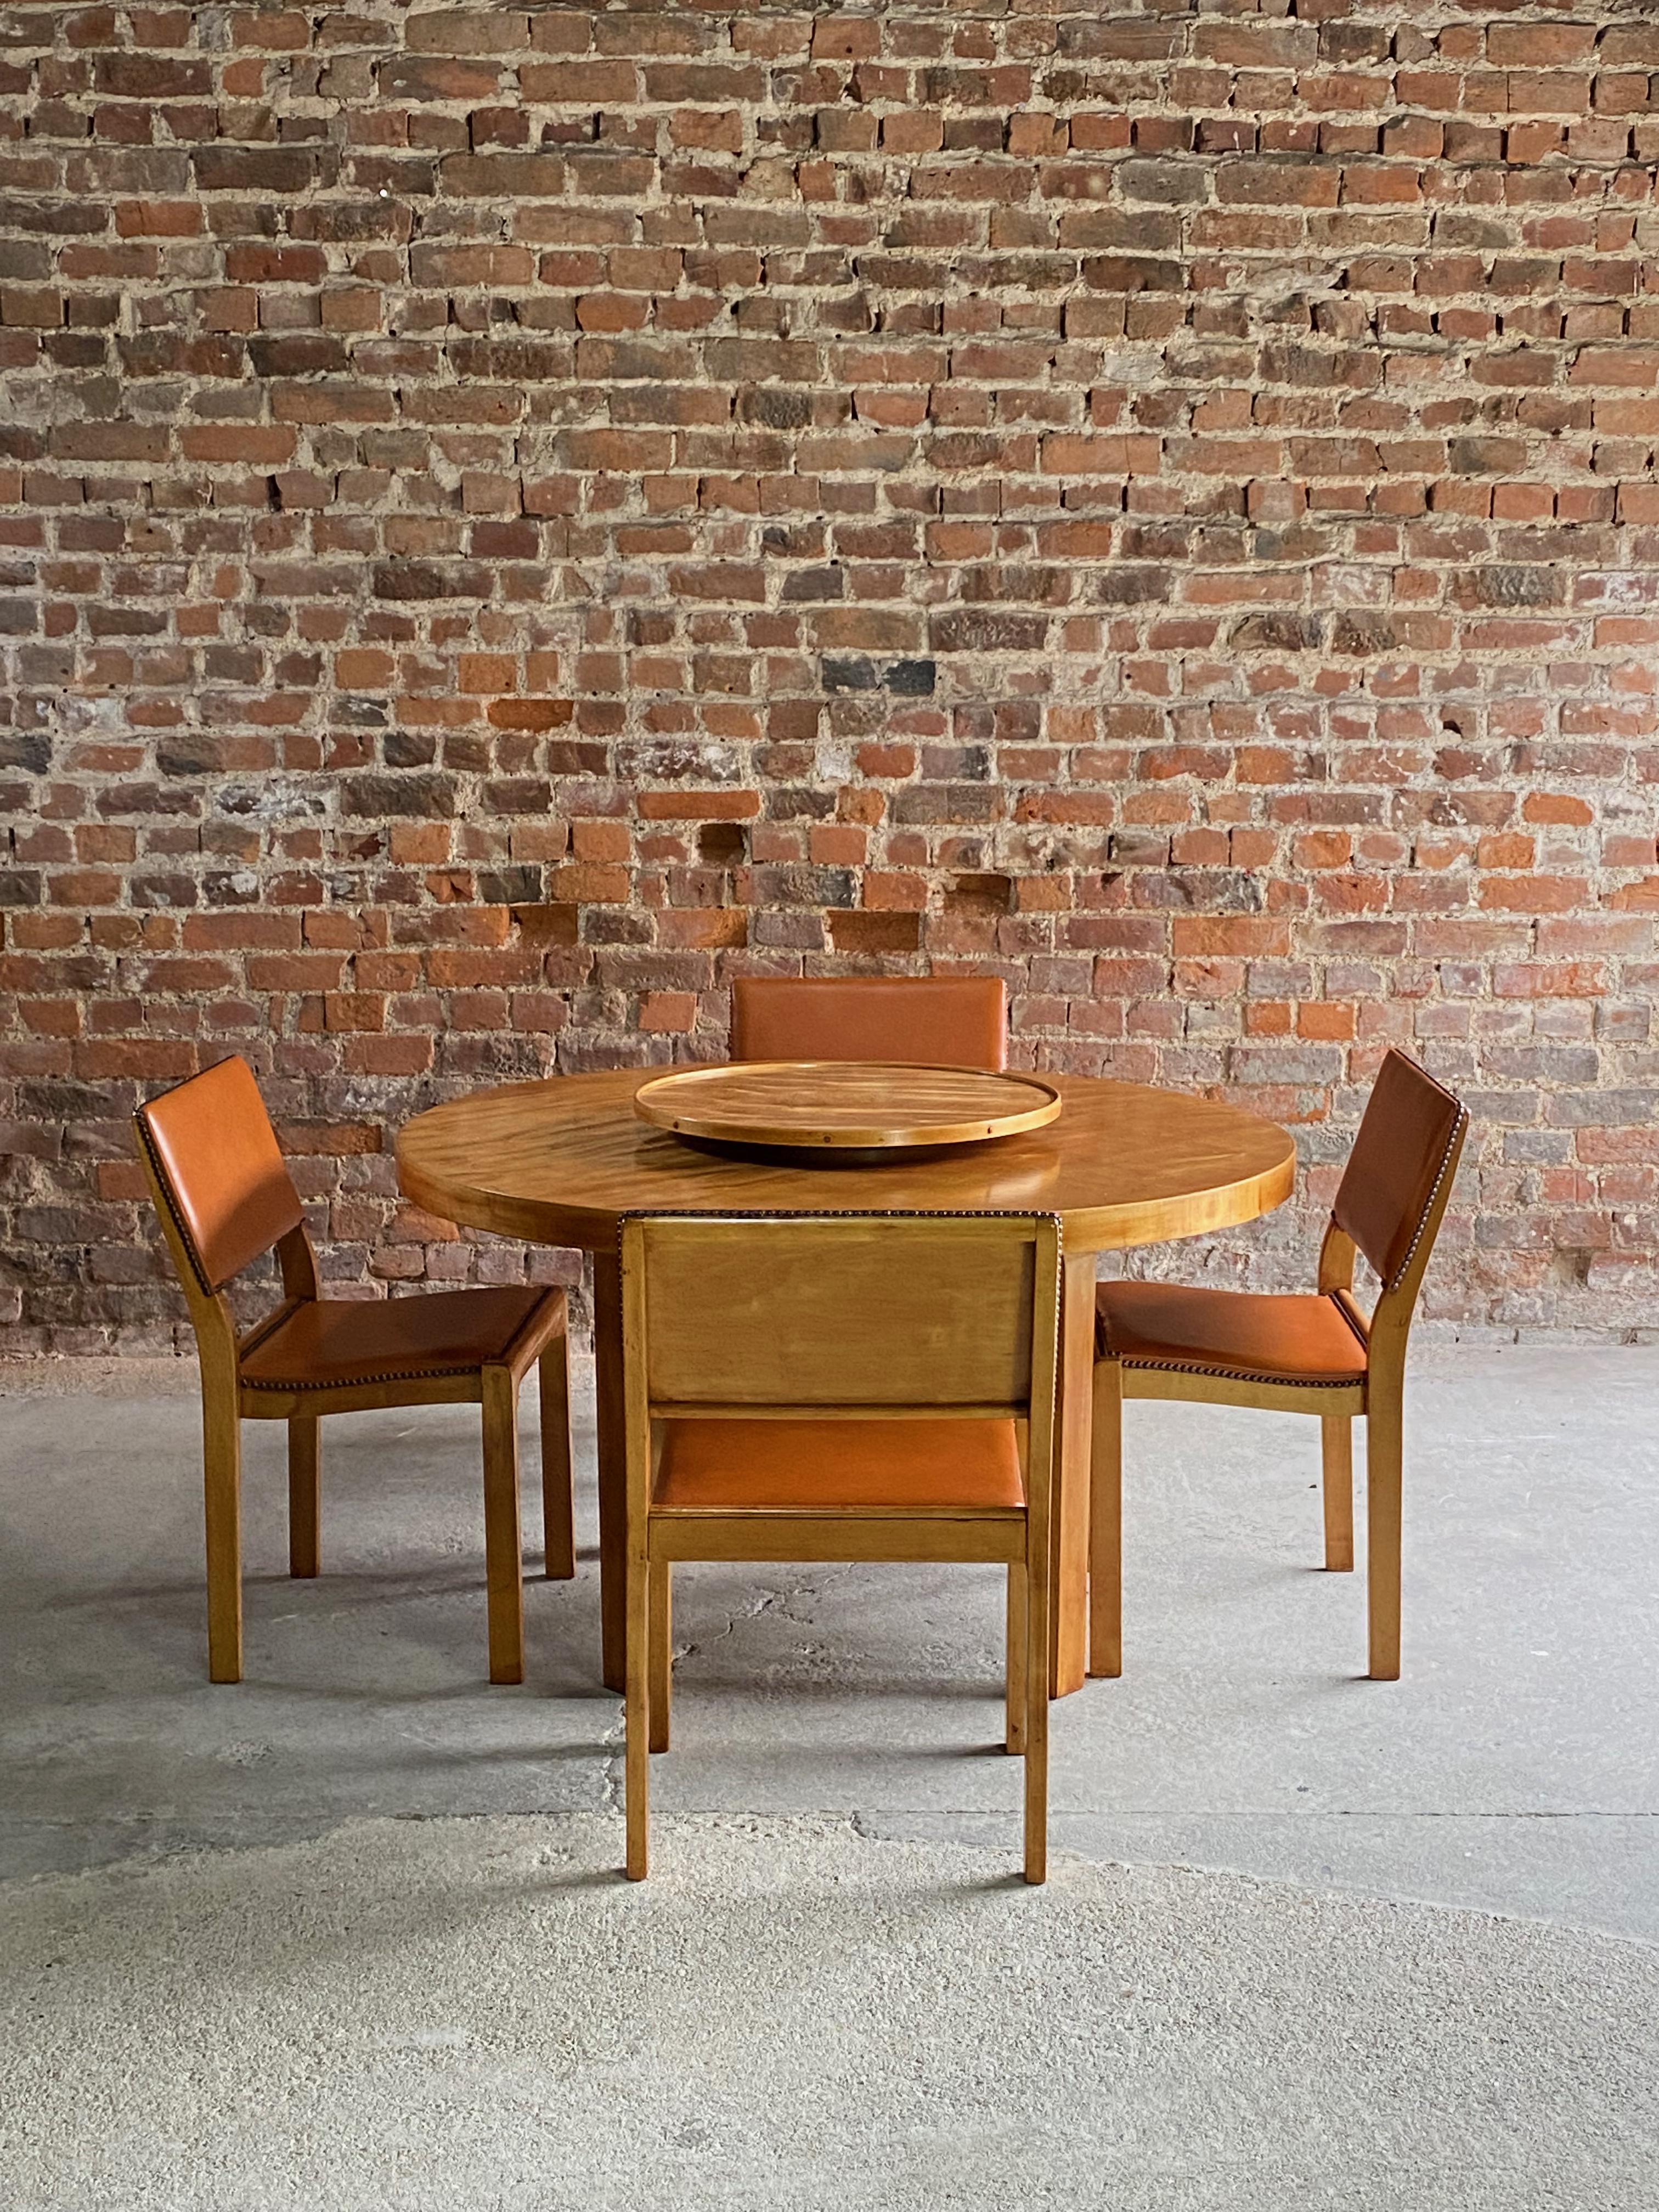 Alvar Aalto Dining Table & Six Chairs by Finmar, Circa 1940 In Fair Condition For Sale In Longdon, Tewkesbury